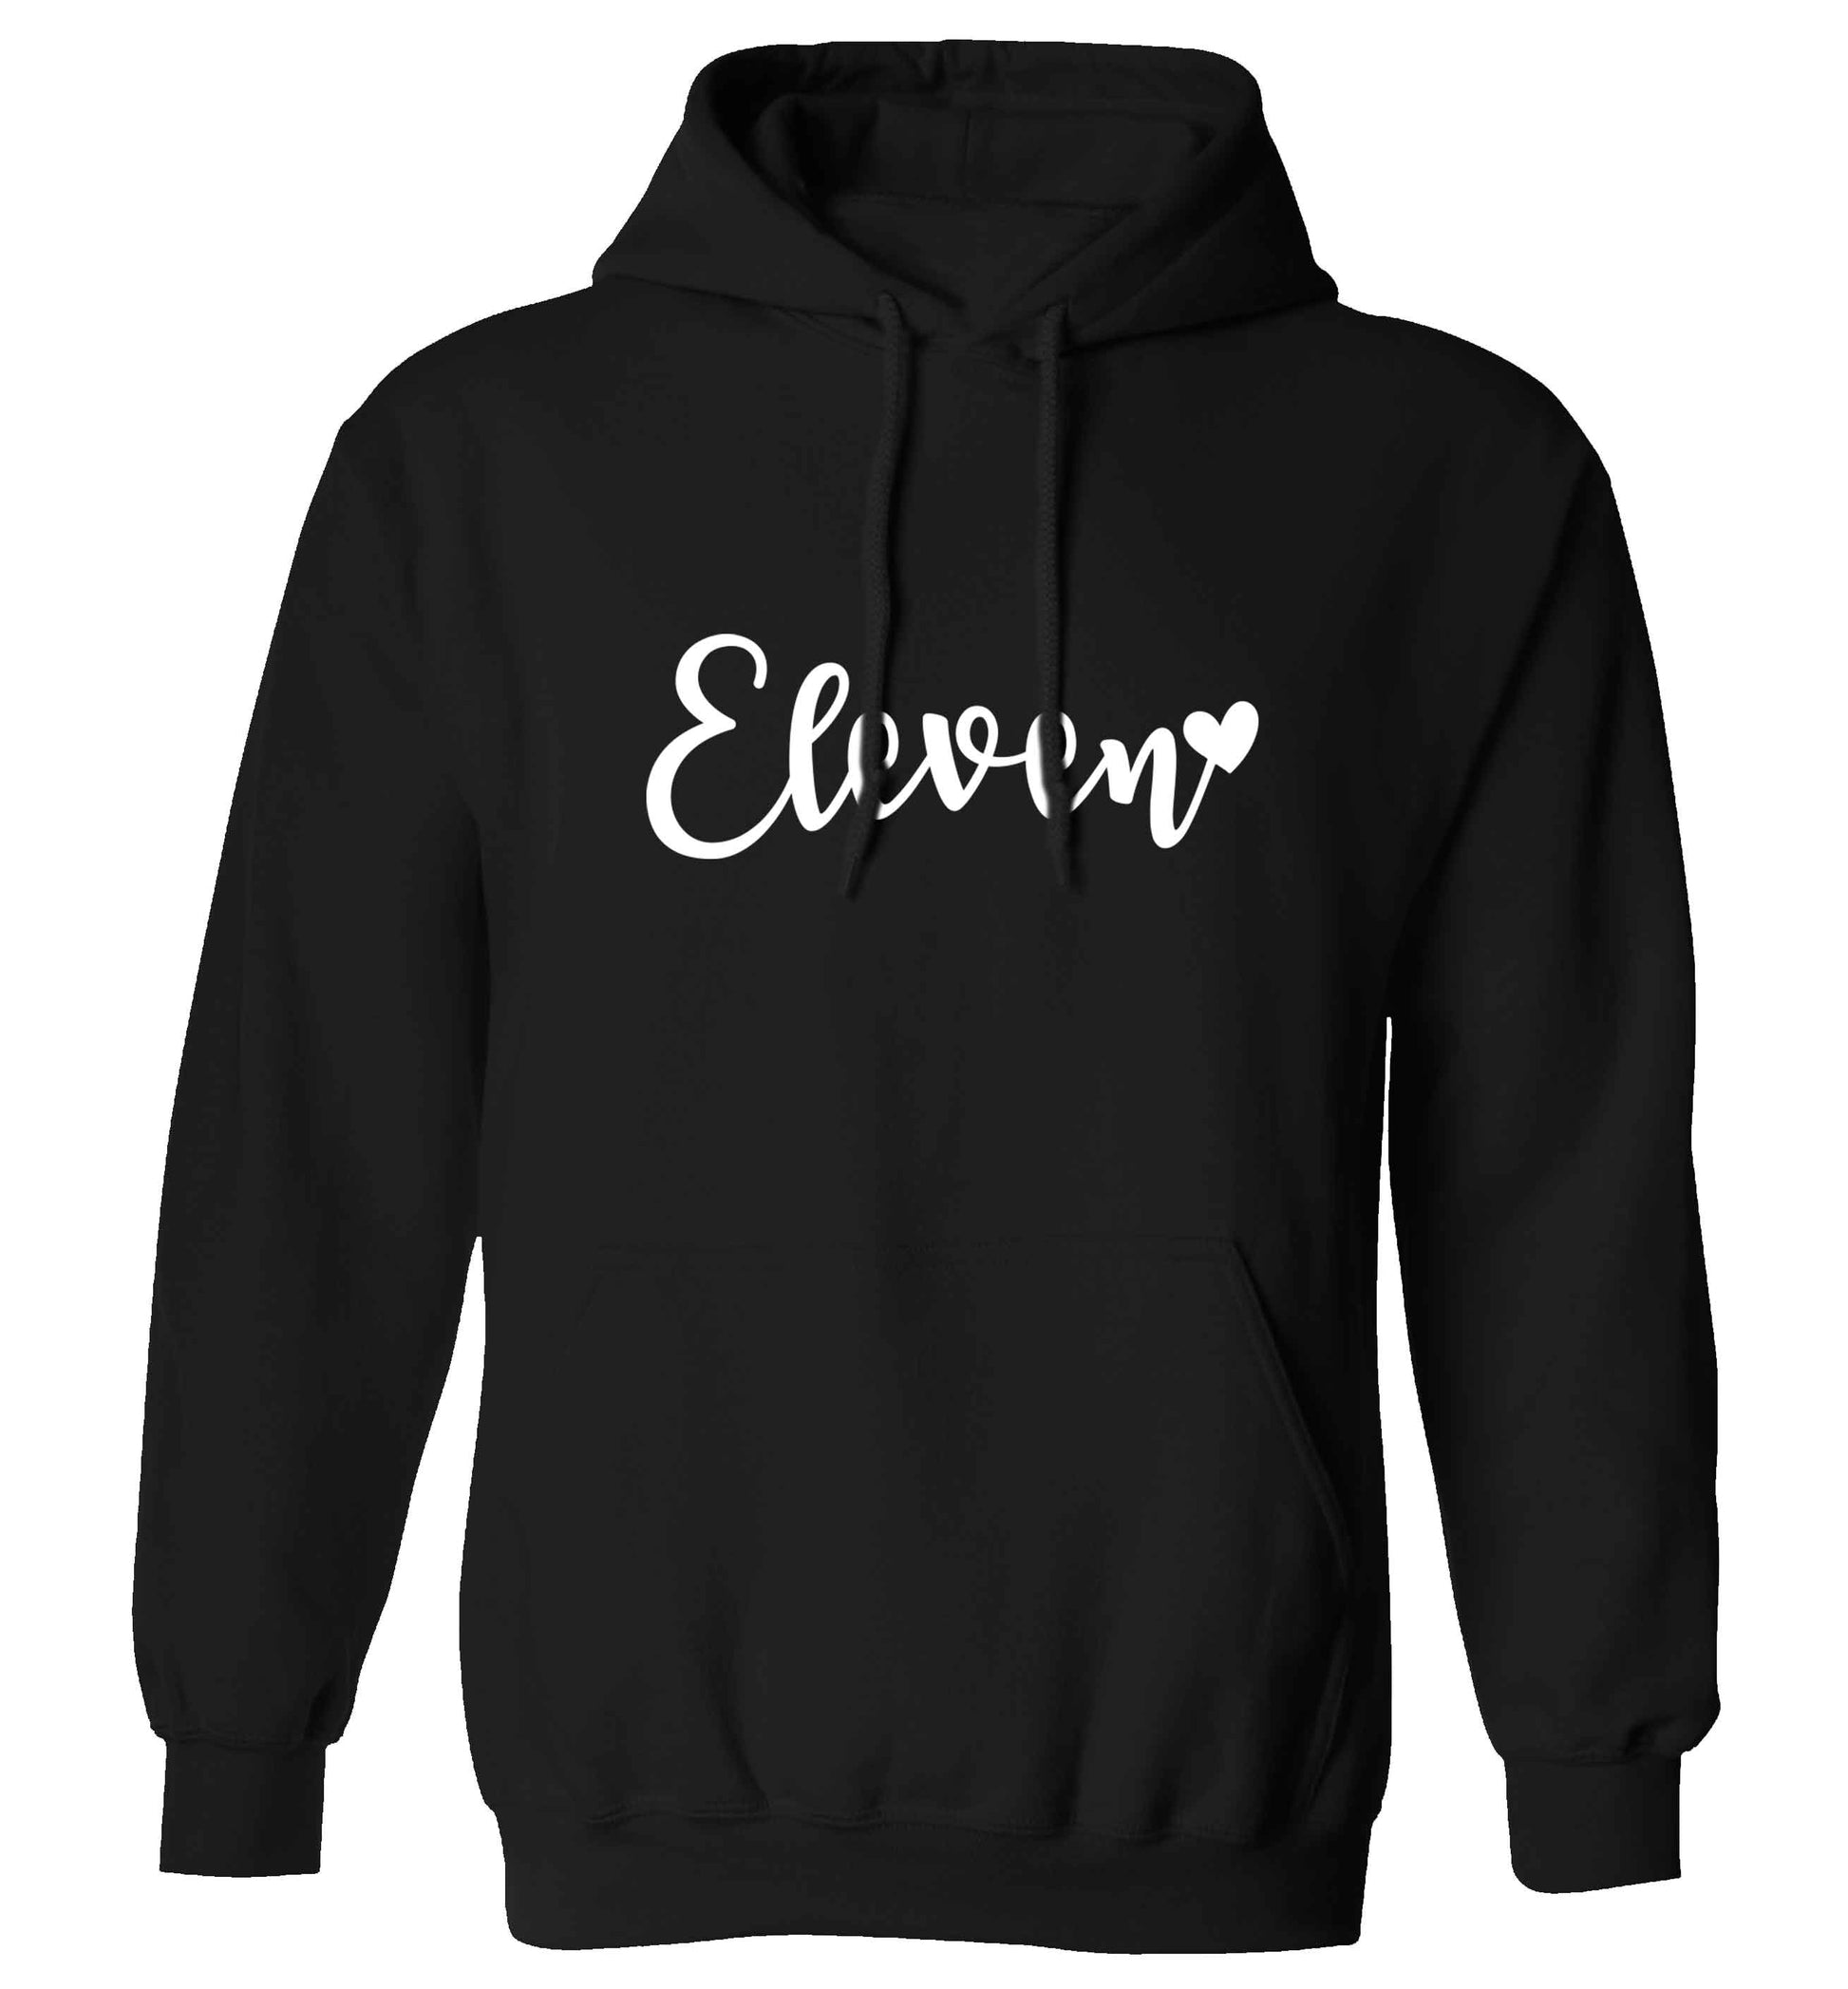 Eleven and heart! adults unisex black hoodie 2XL